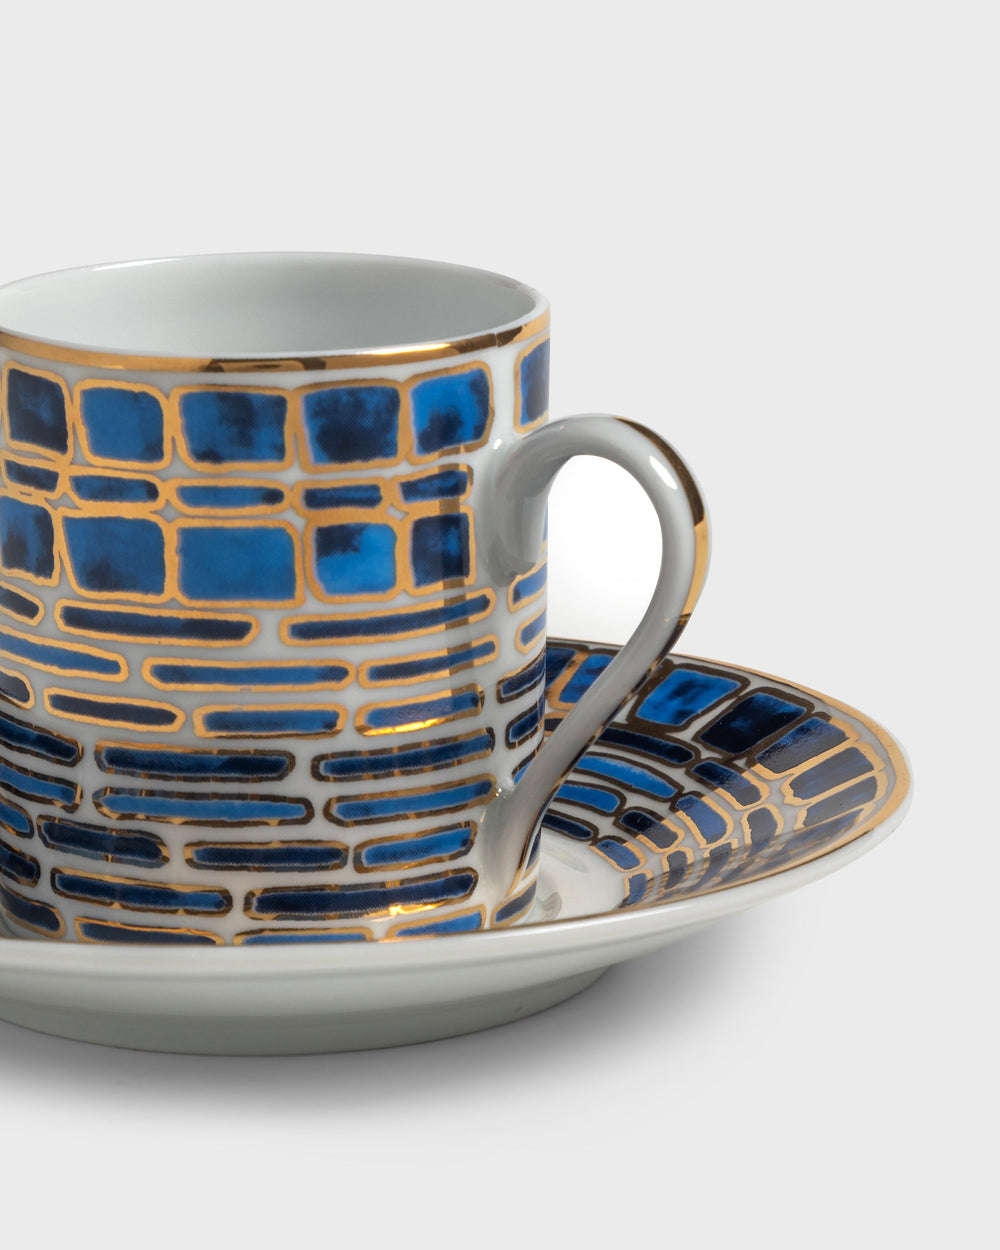 Tania Bulhoes Espresso Cup and Saucer Jade Blue